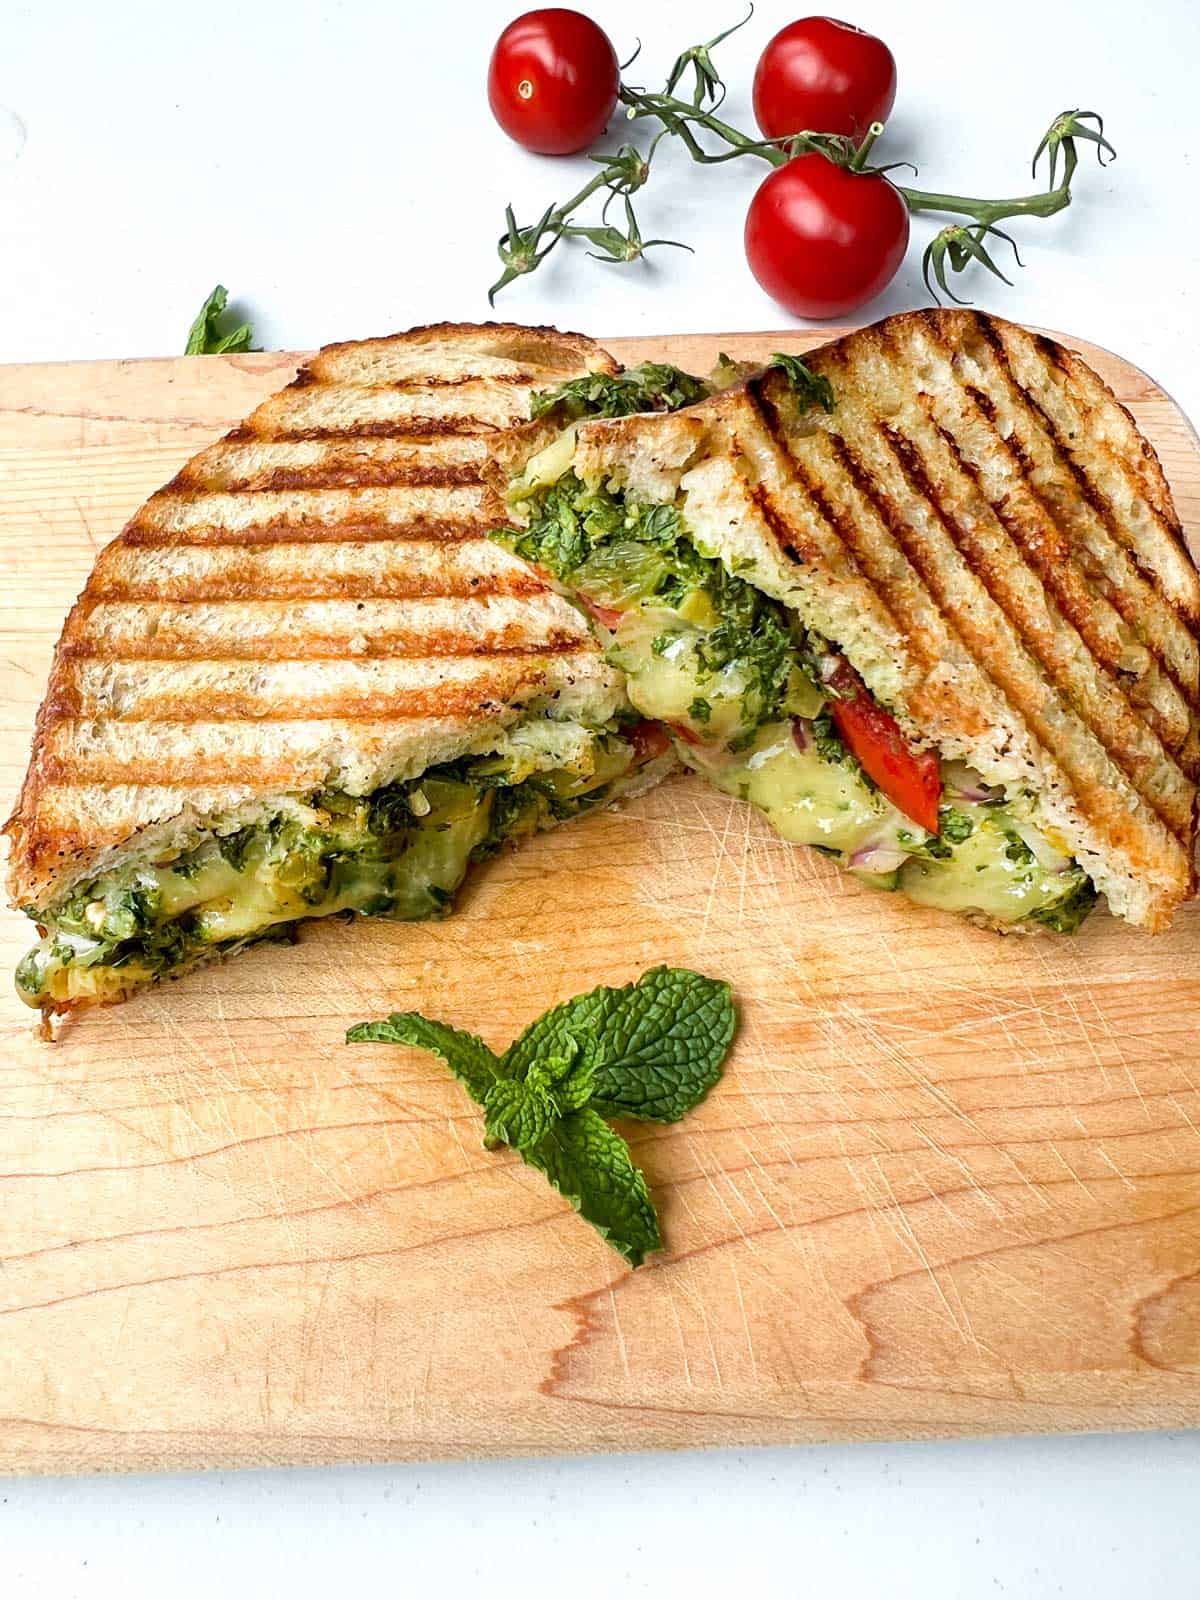 cheese panini grilled Mumbai sandwich on wooden cutting board with 3 cherry tomatoes in the backgrouind